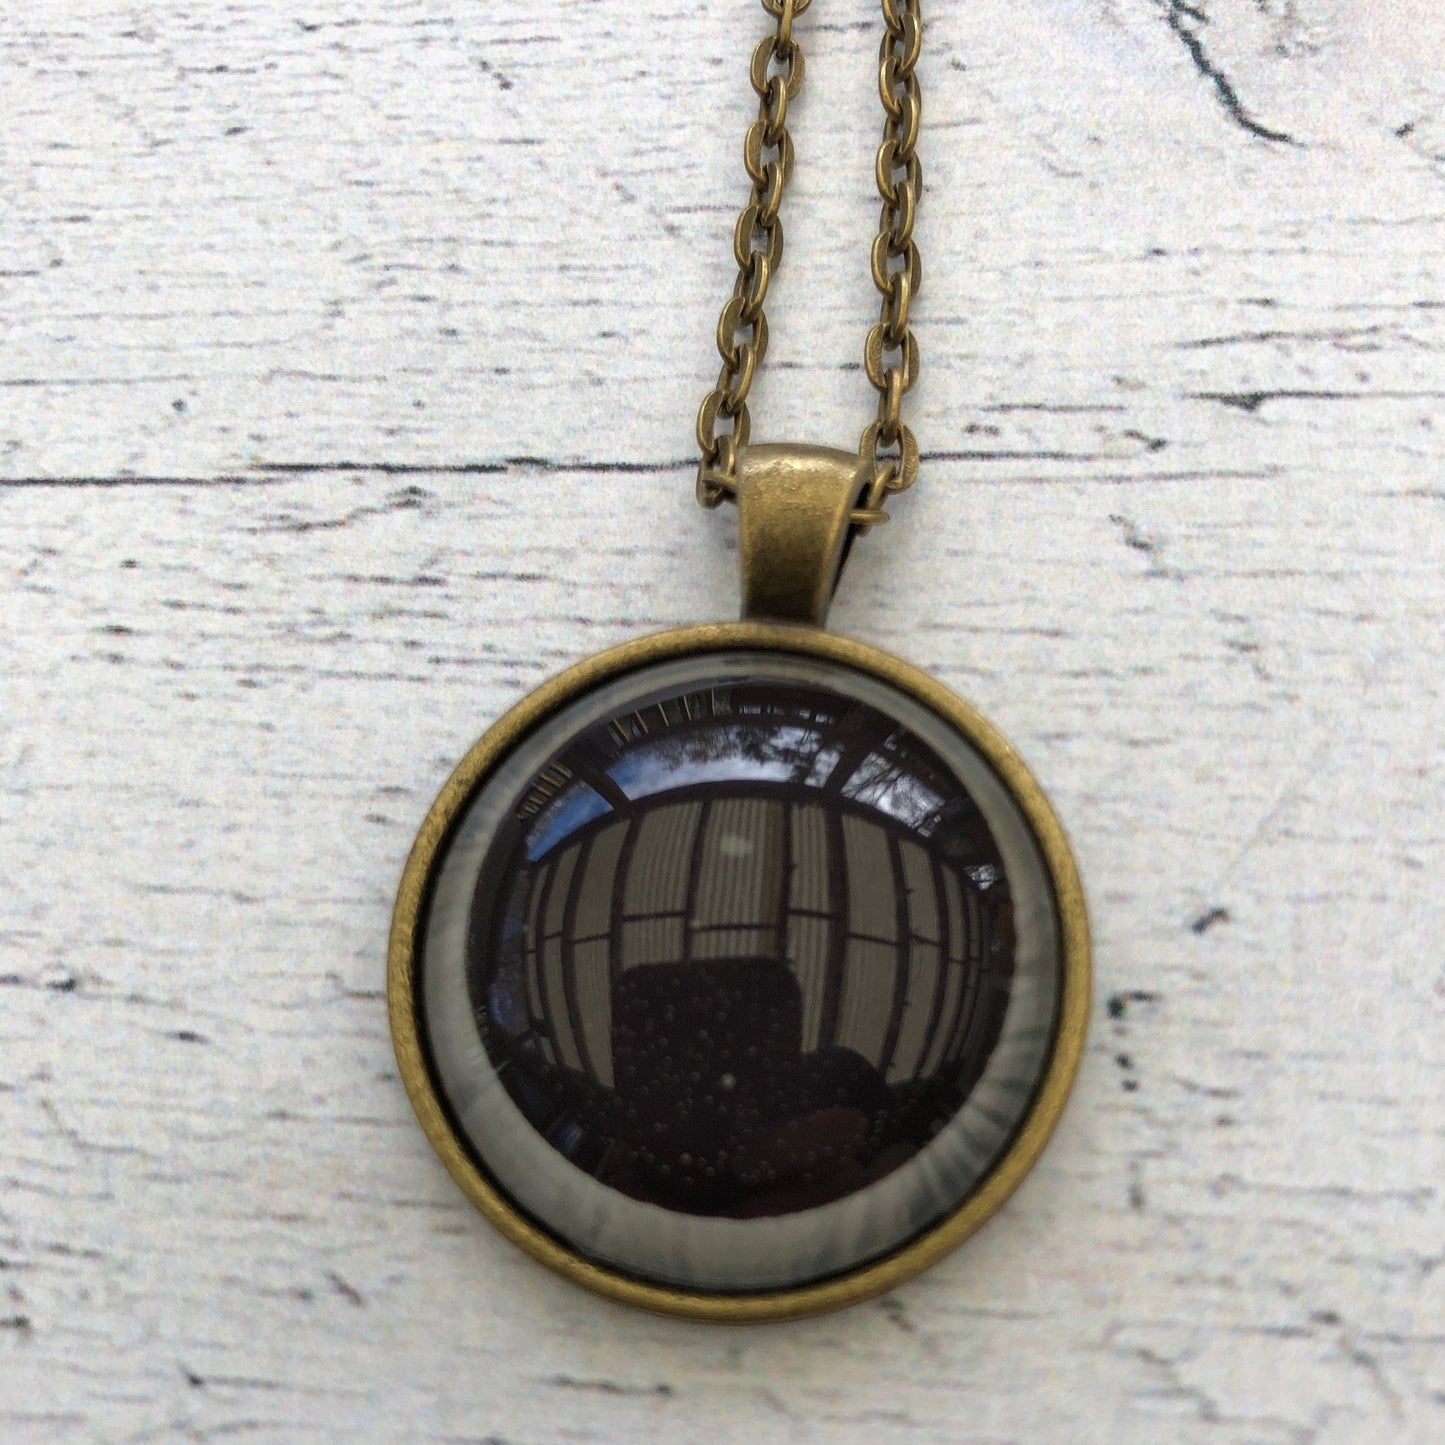 Postage Stamp Necklace - 2017 USA Solar Eclipse Color Changing Moon